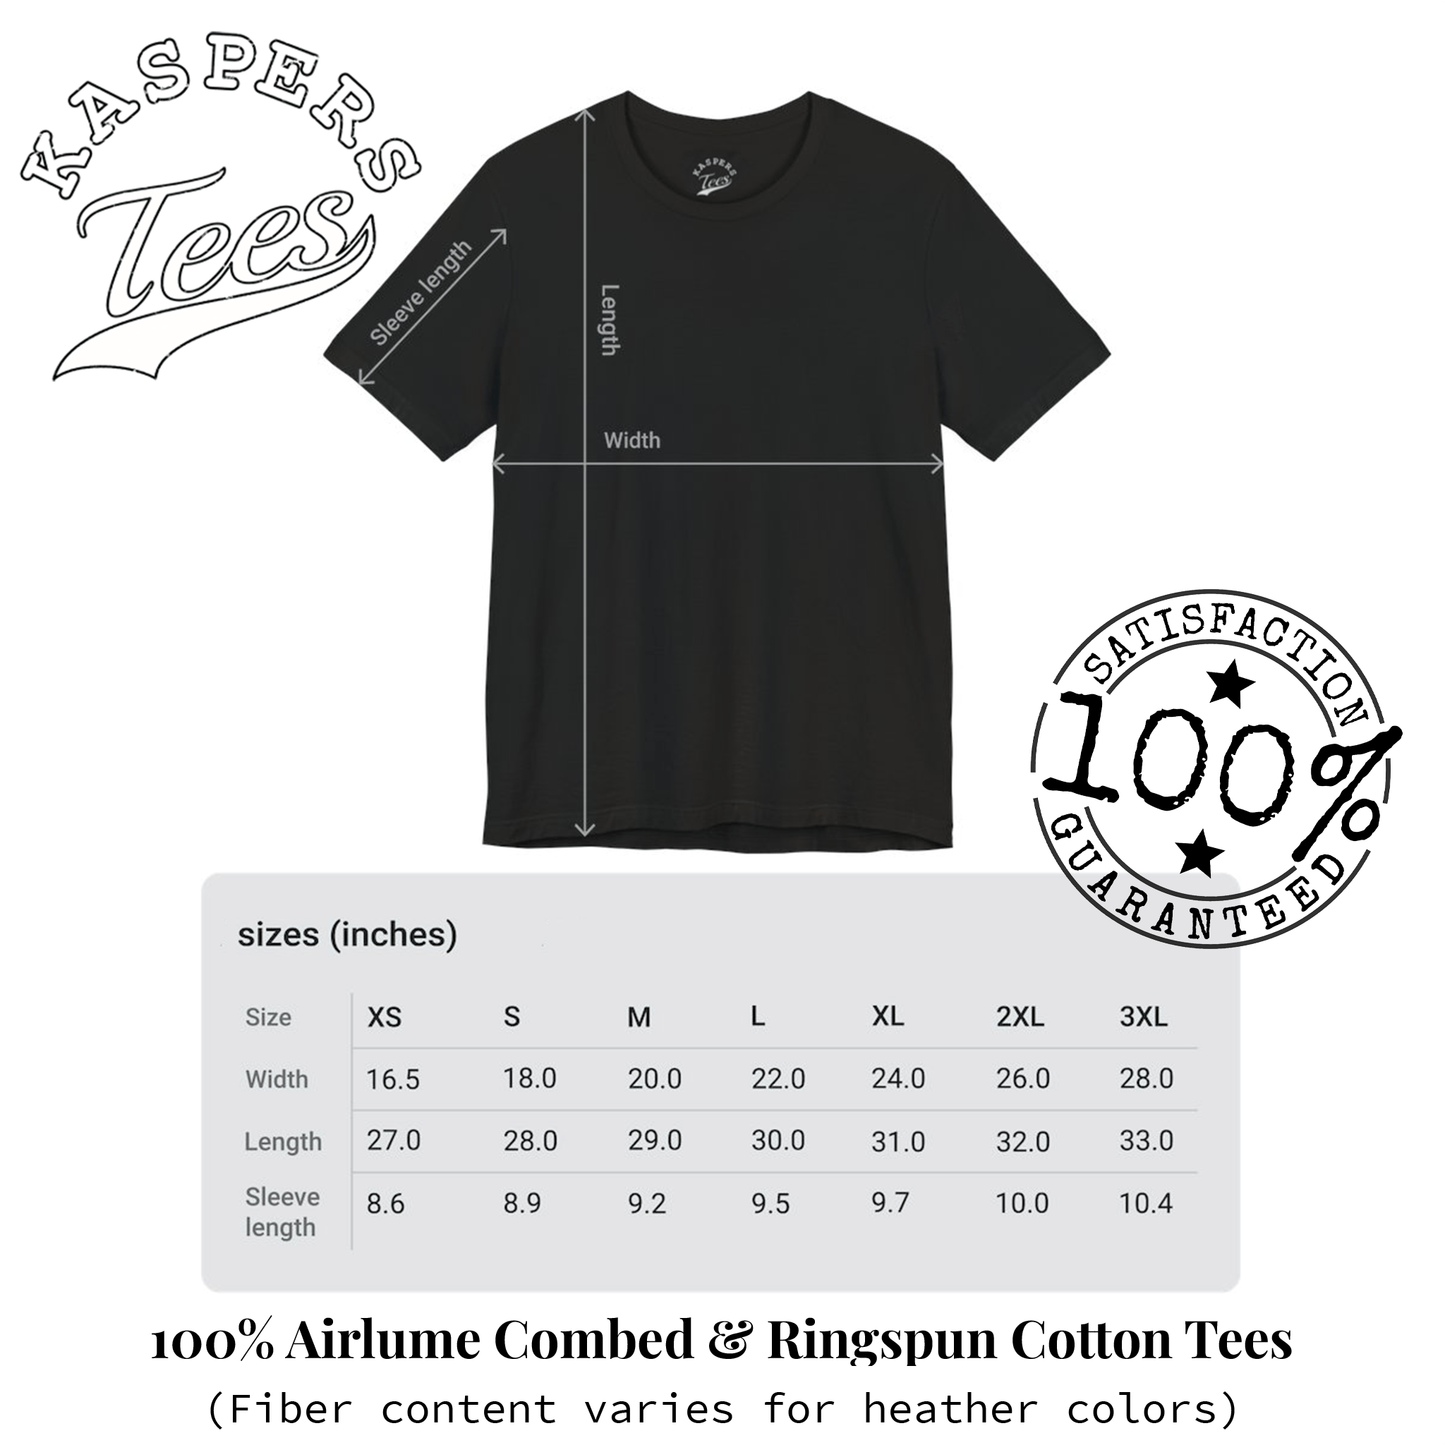 Image Based Size Chart - Text Readable Size Chart Located Under Description. - Kaspers Tees 